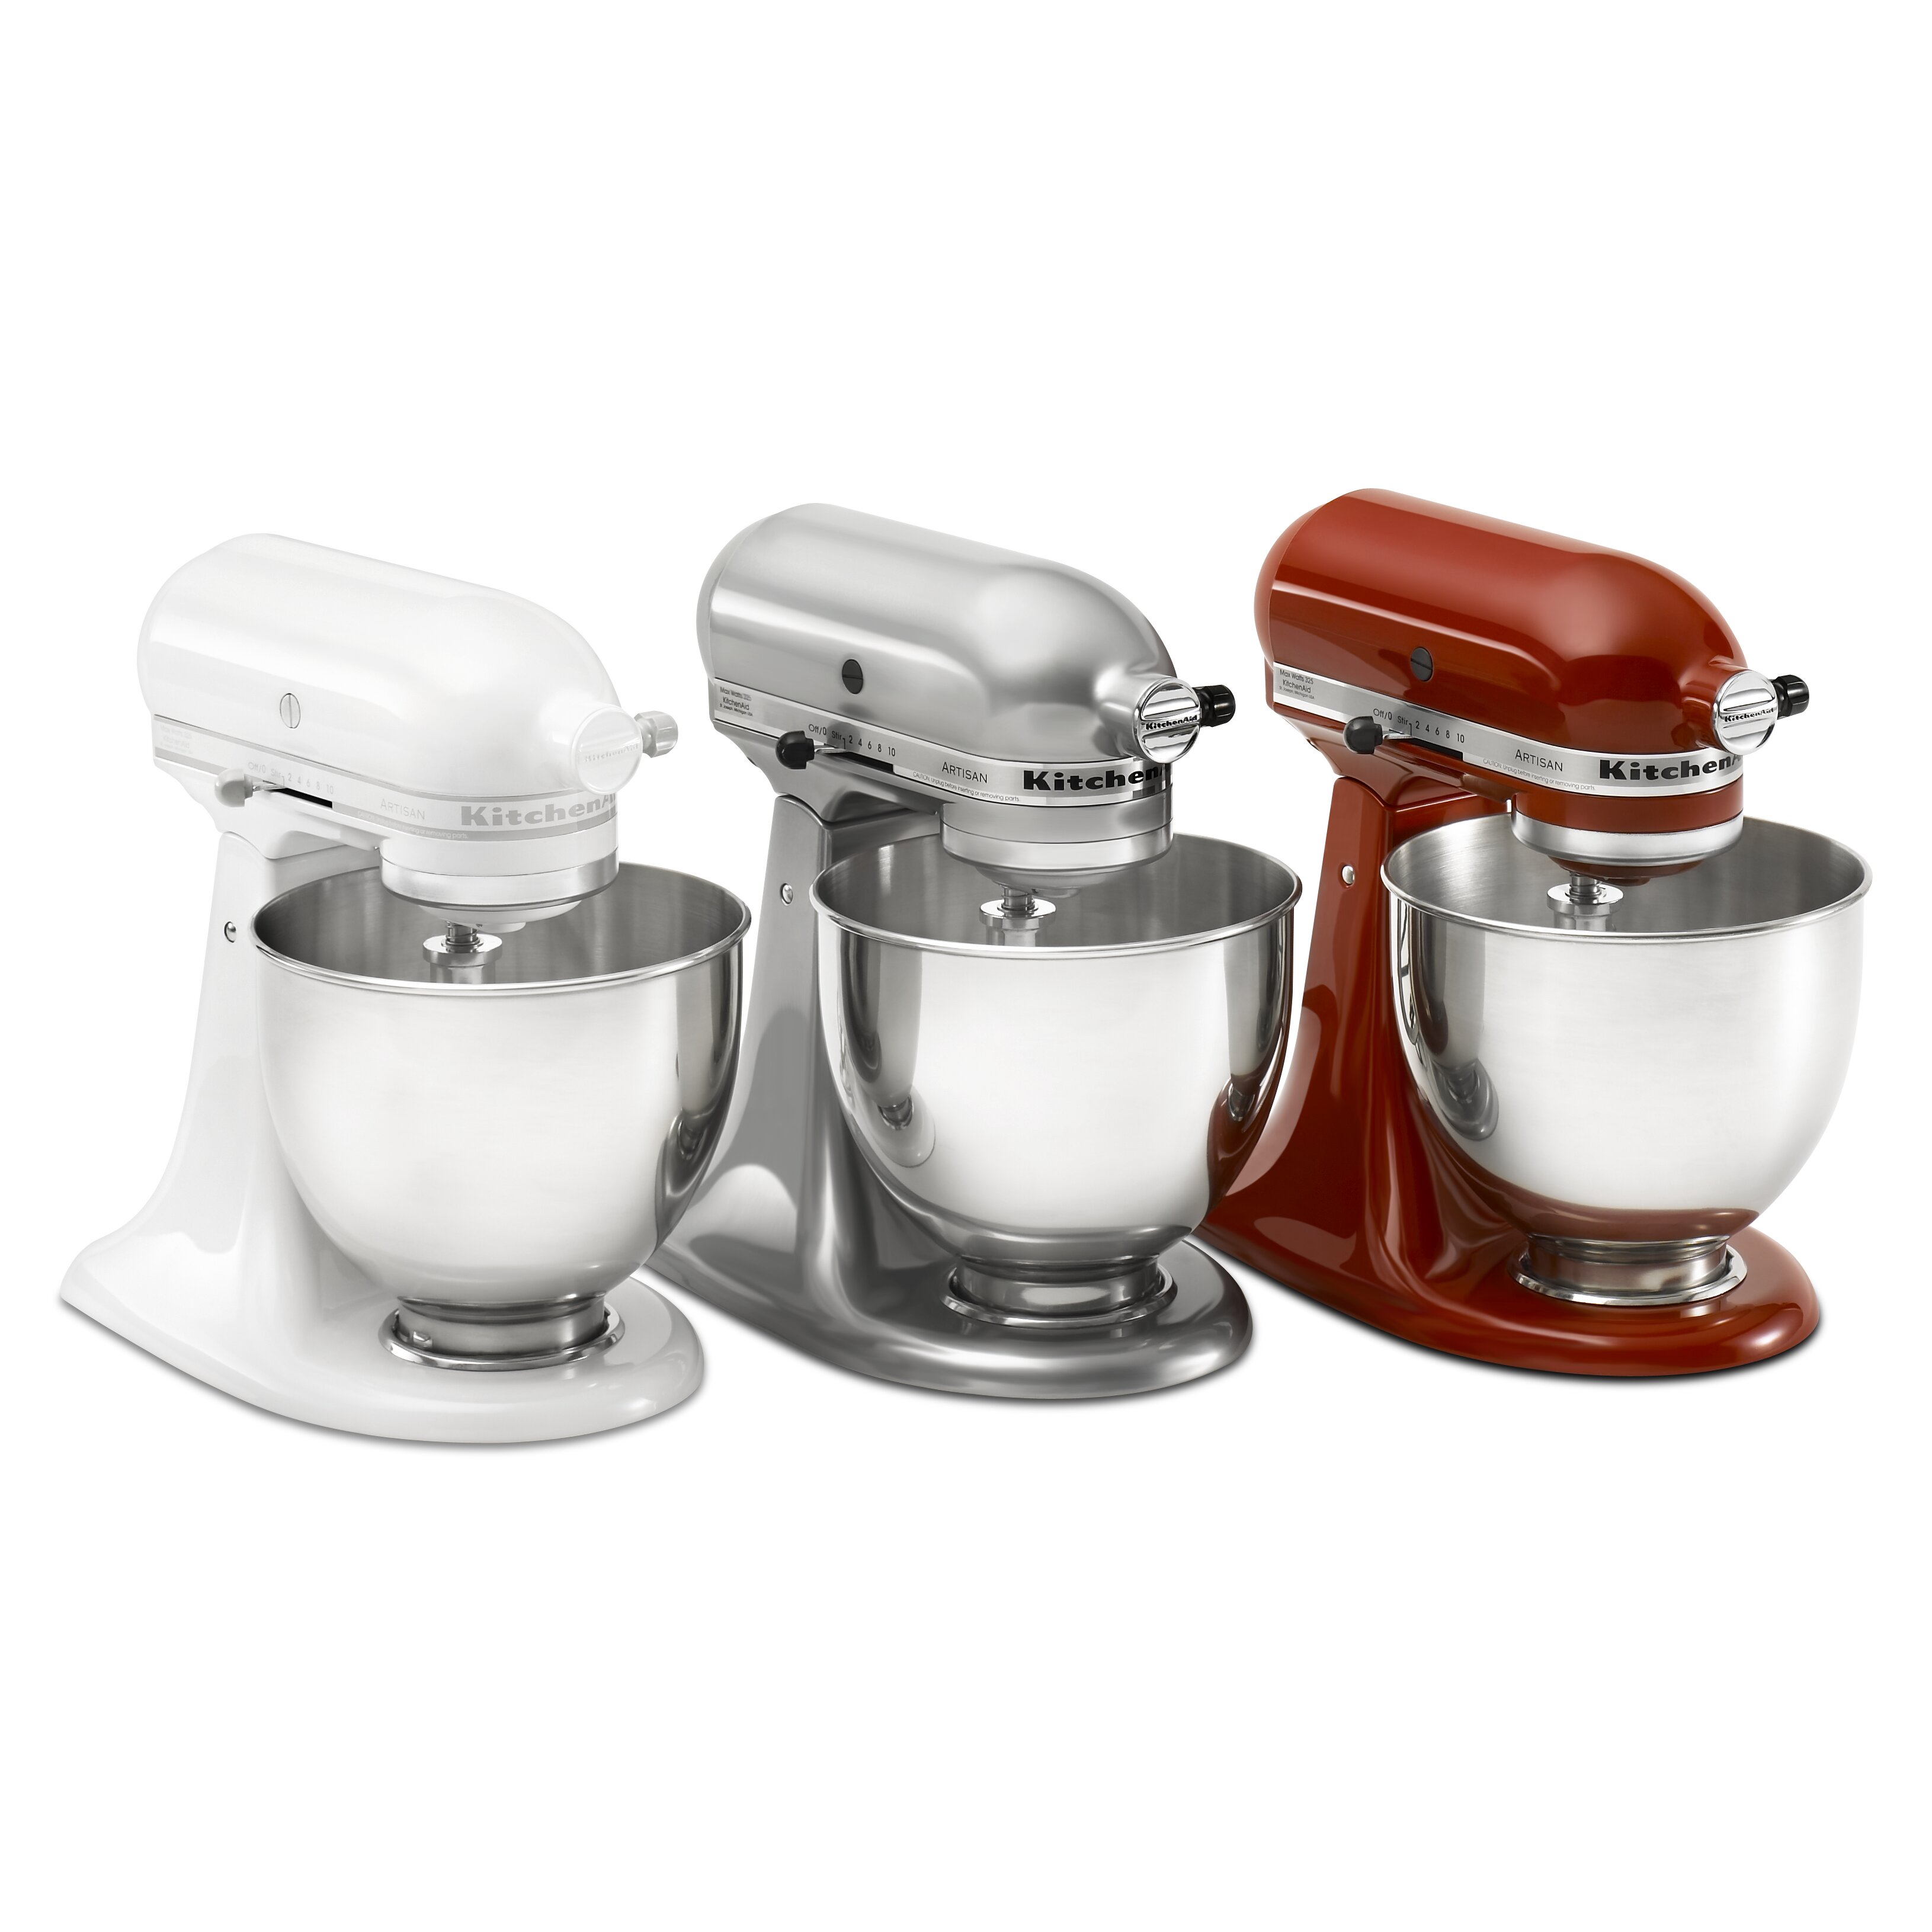 KitchenAid Artisan Series 5 Qt. Stand Mixer with Stainless Steel Kitchenaid Mixer Glass Bowl Vs Stainless Steel